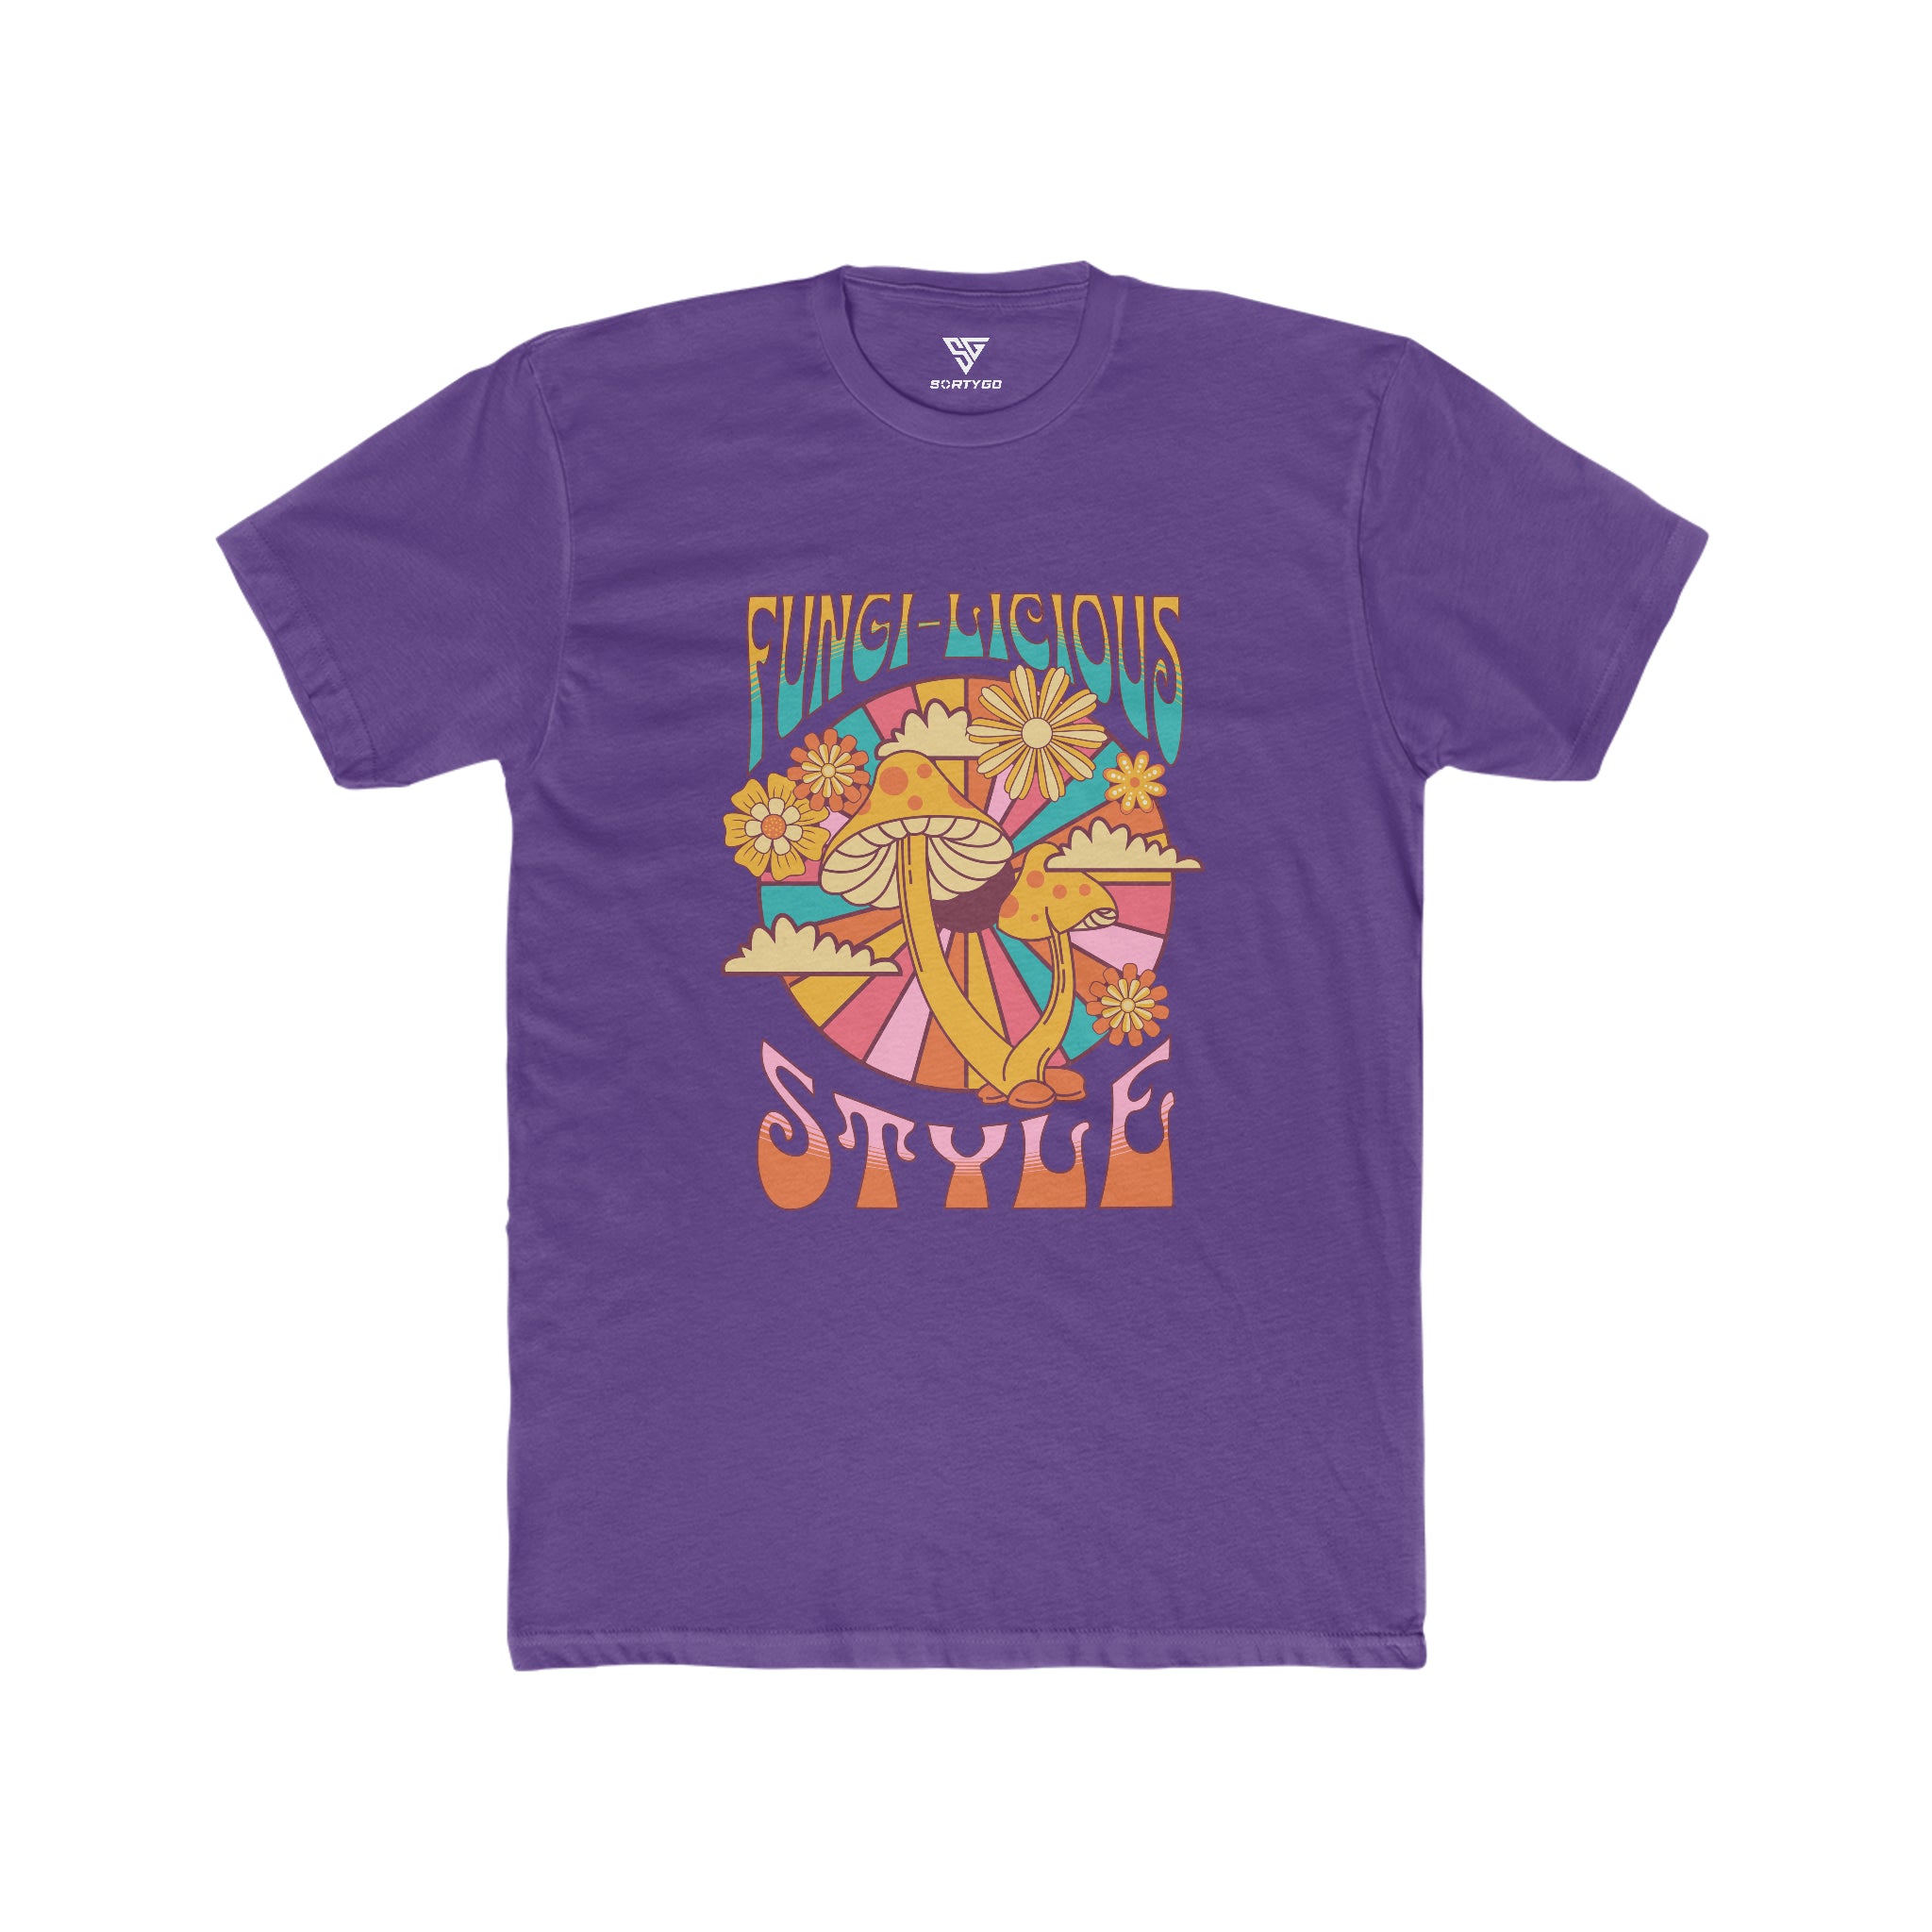 SORTYGO - Fungi-licious Style Men Fitted T-Shirt in Solid Purple Rush